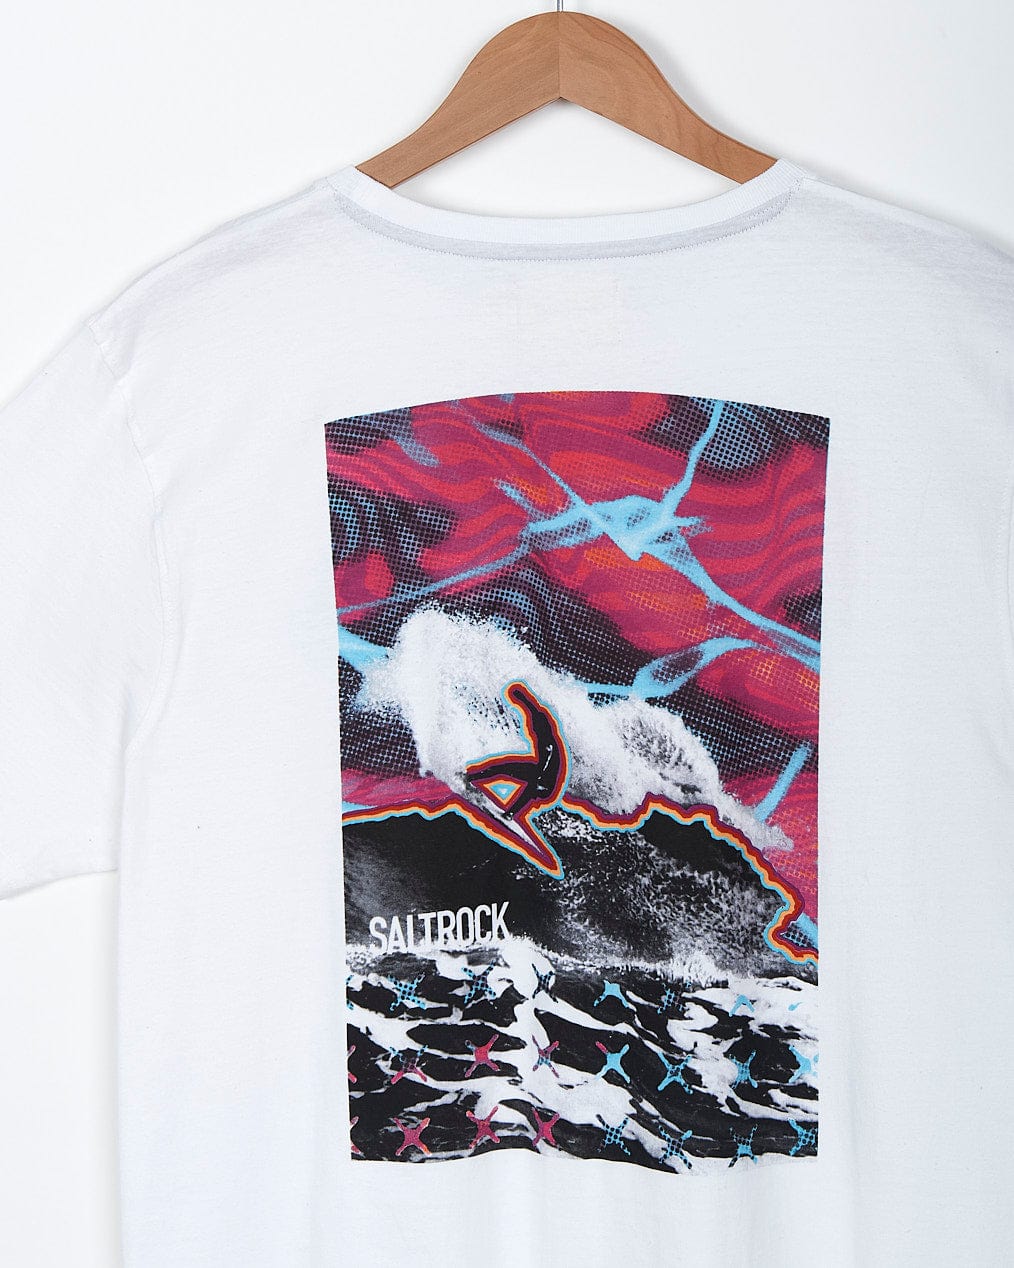 A Saltrock Poolside Wave - Mens Short Sleeve T-Shirt - White with an image of a surfer riding a wave.